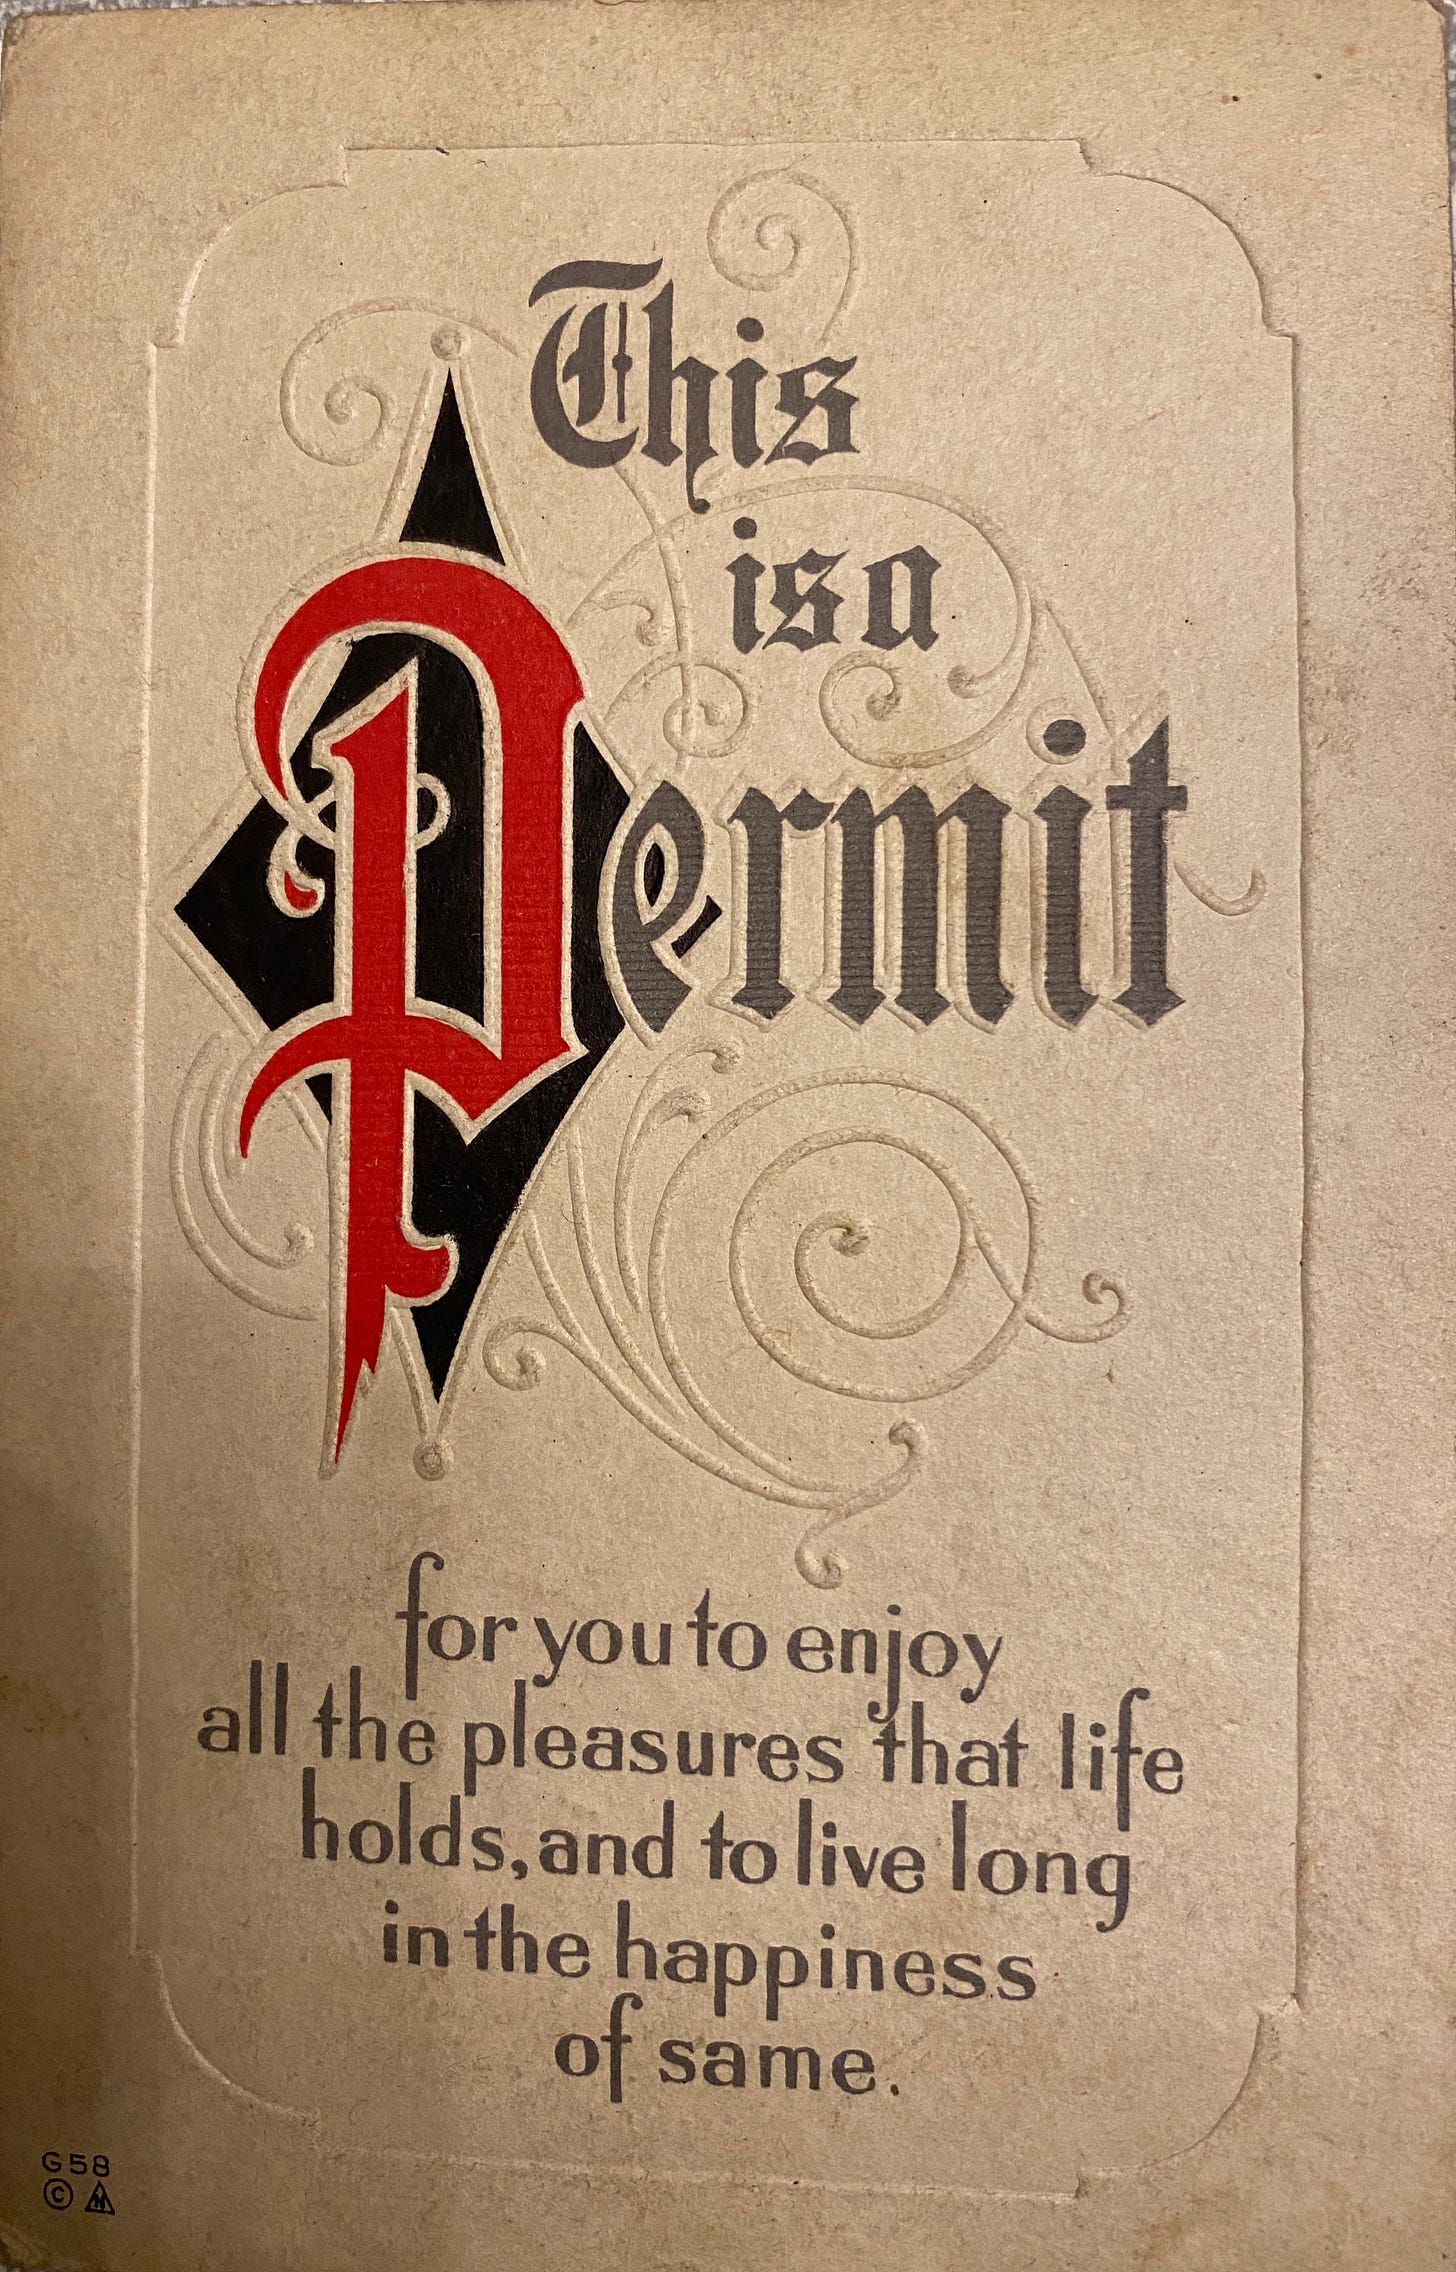 A vintage card that reads "This is a permit for you to enjoy all the pleasures that life holds and to live long in the happiness of the same"